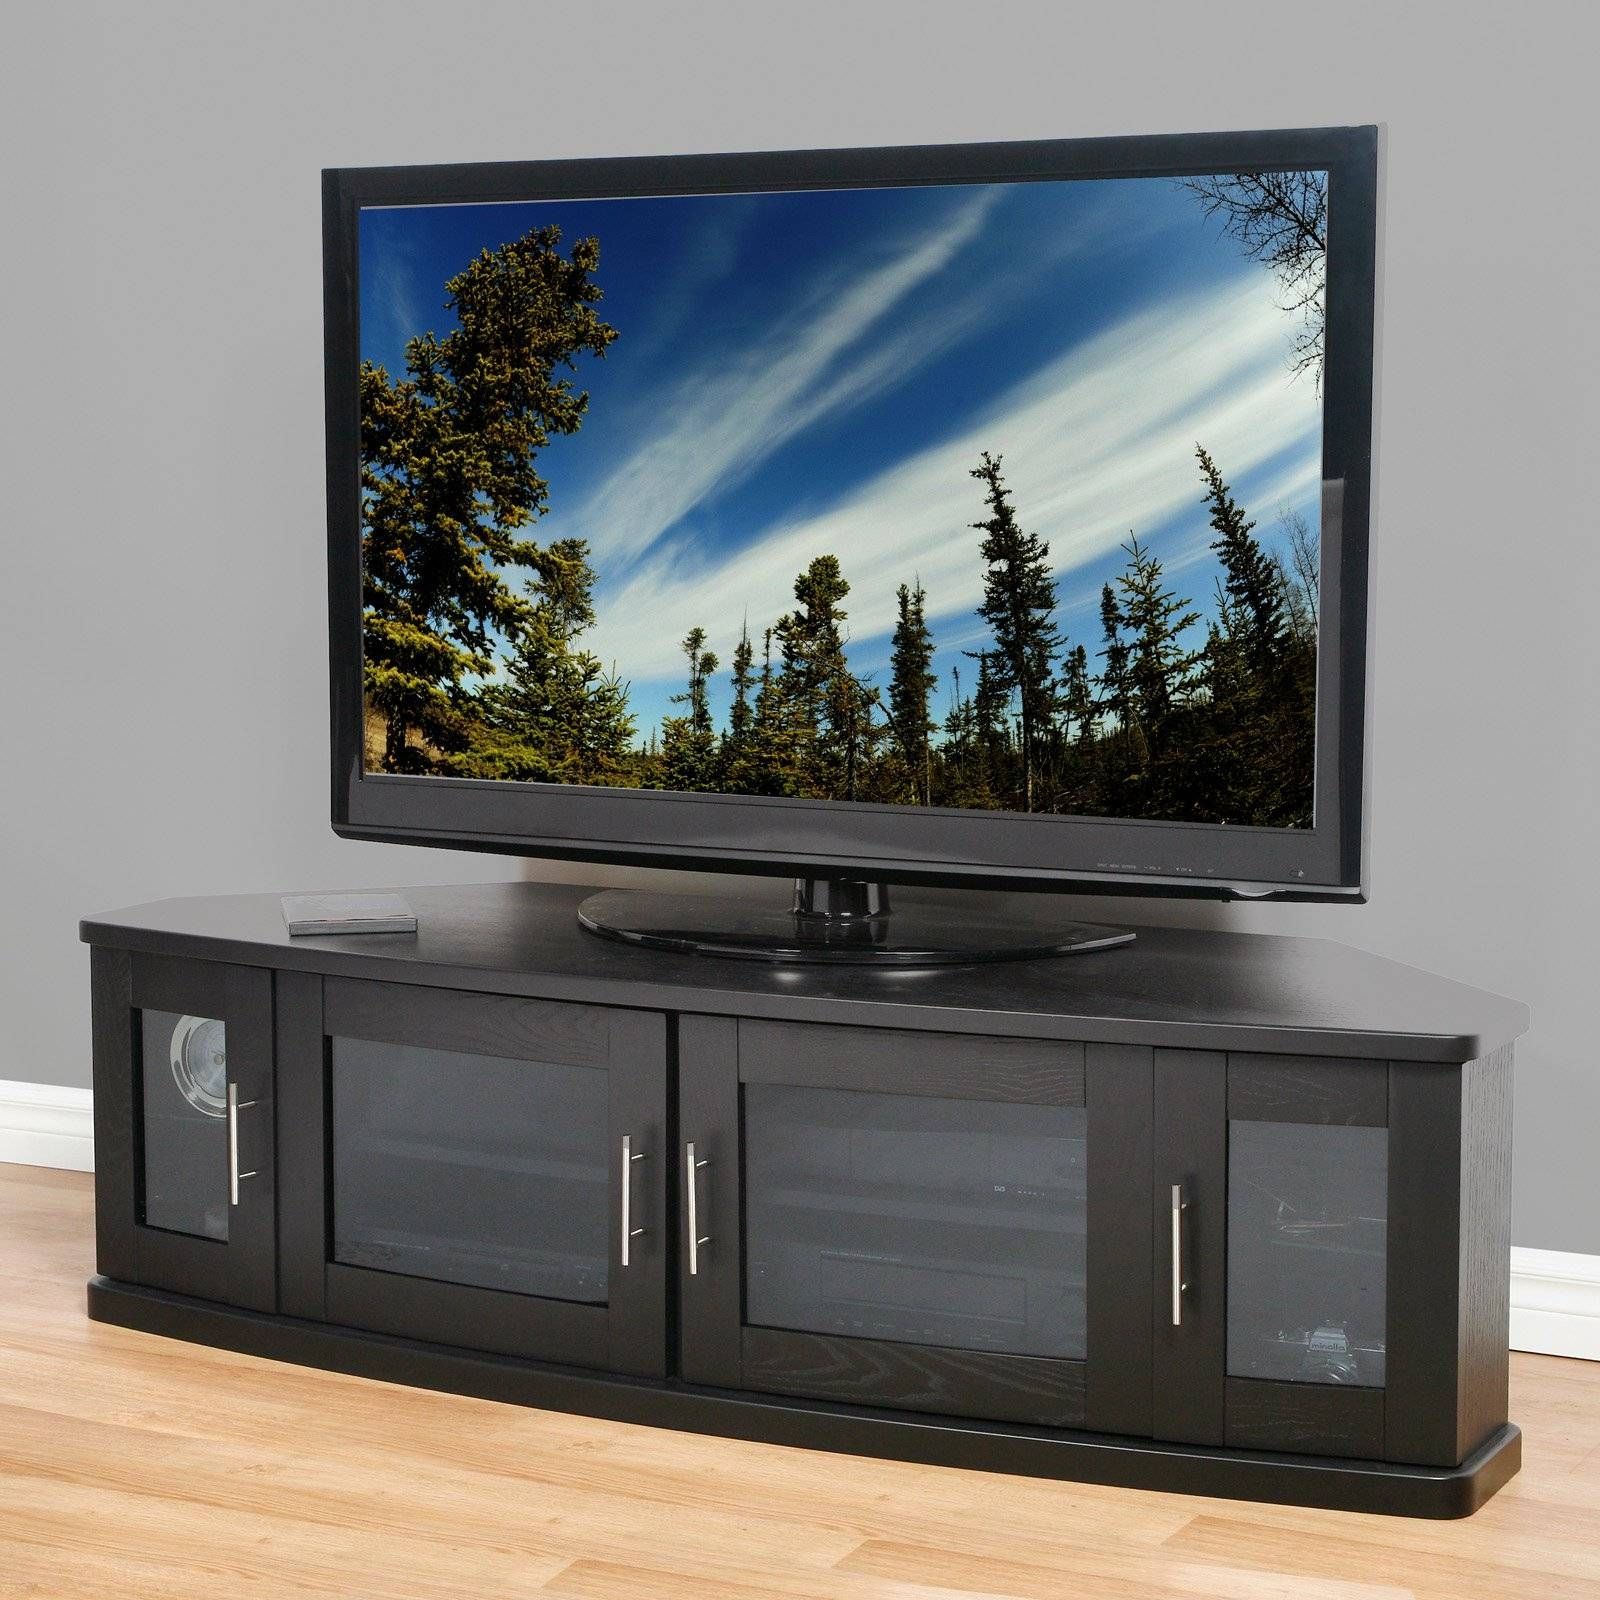 Modern Black Wooden Tv Stand With Frosted Glass Doors Of Dazzling For Corner Tv Unit With Glass Doors (View 6 of 15)